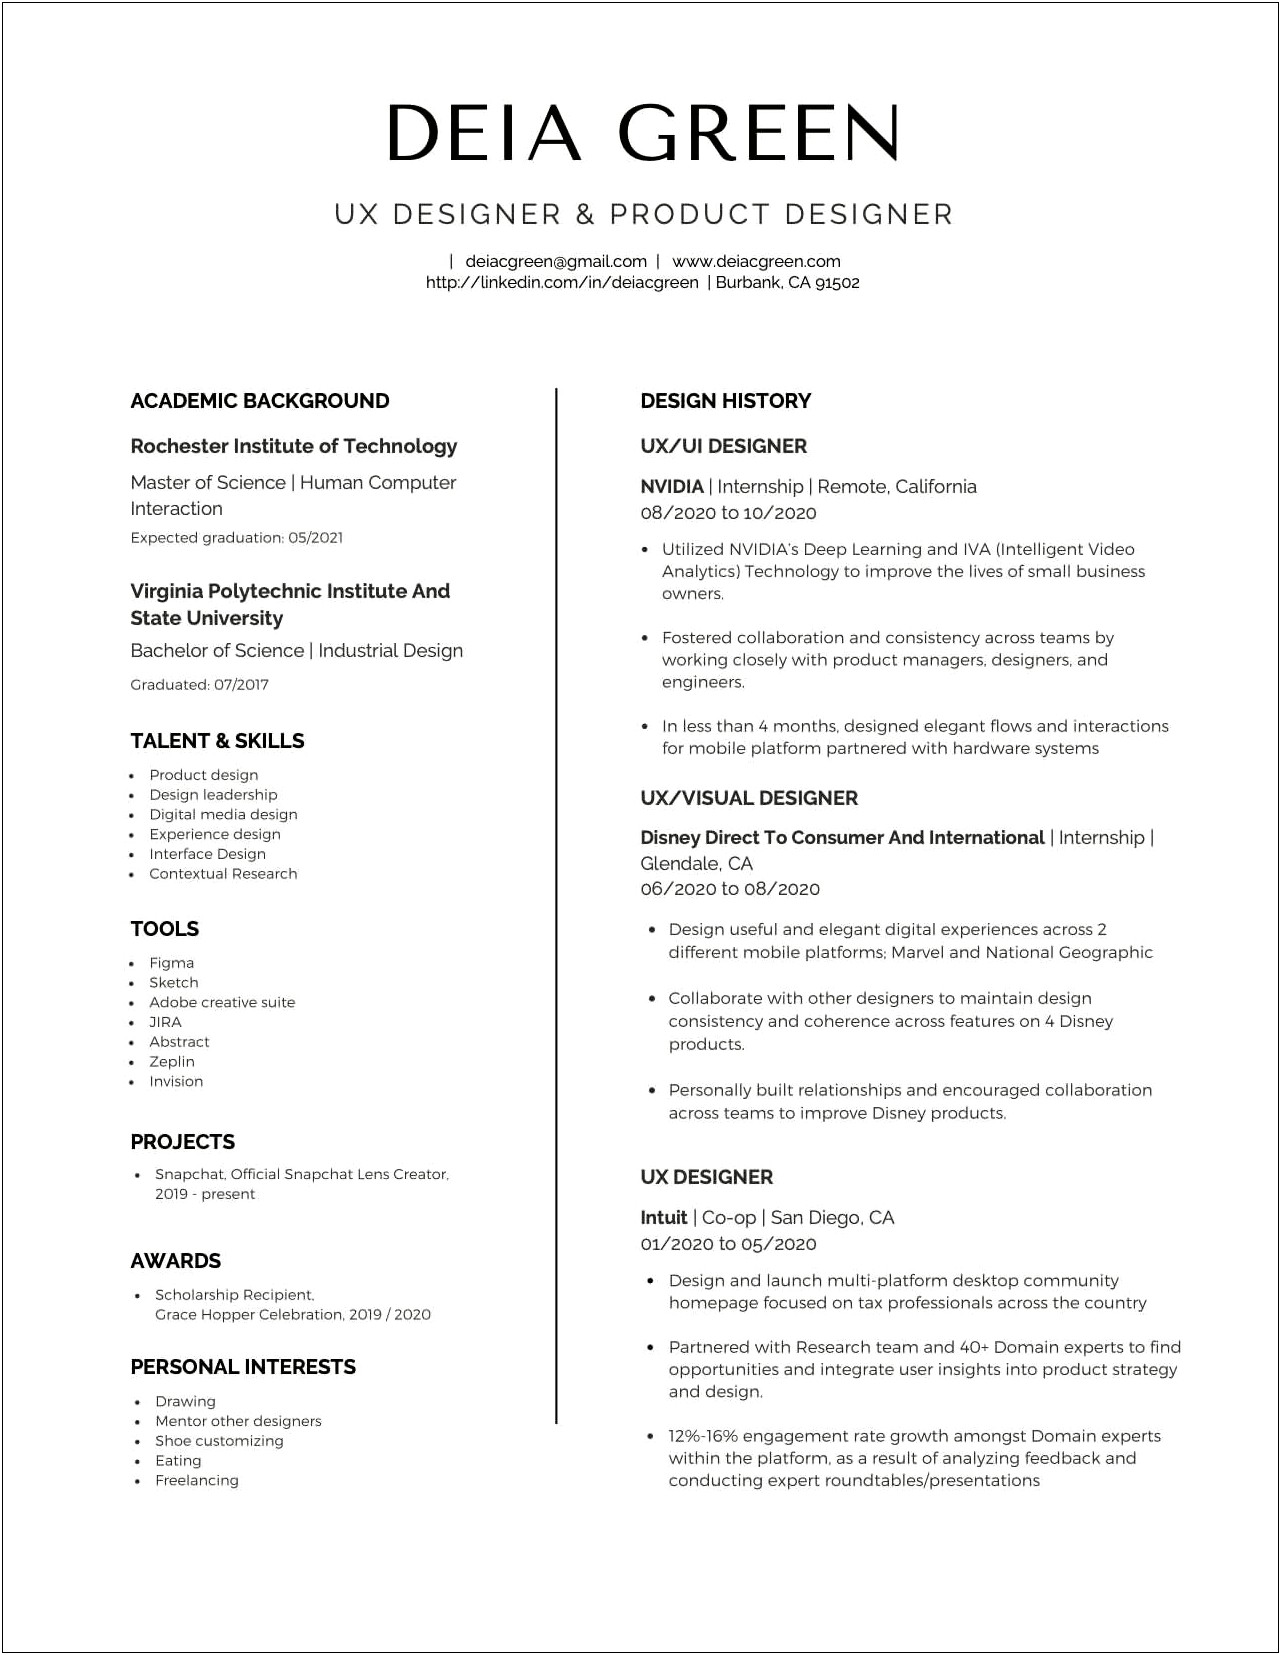 Resume With Wifi Product Design Experience